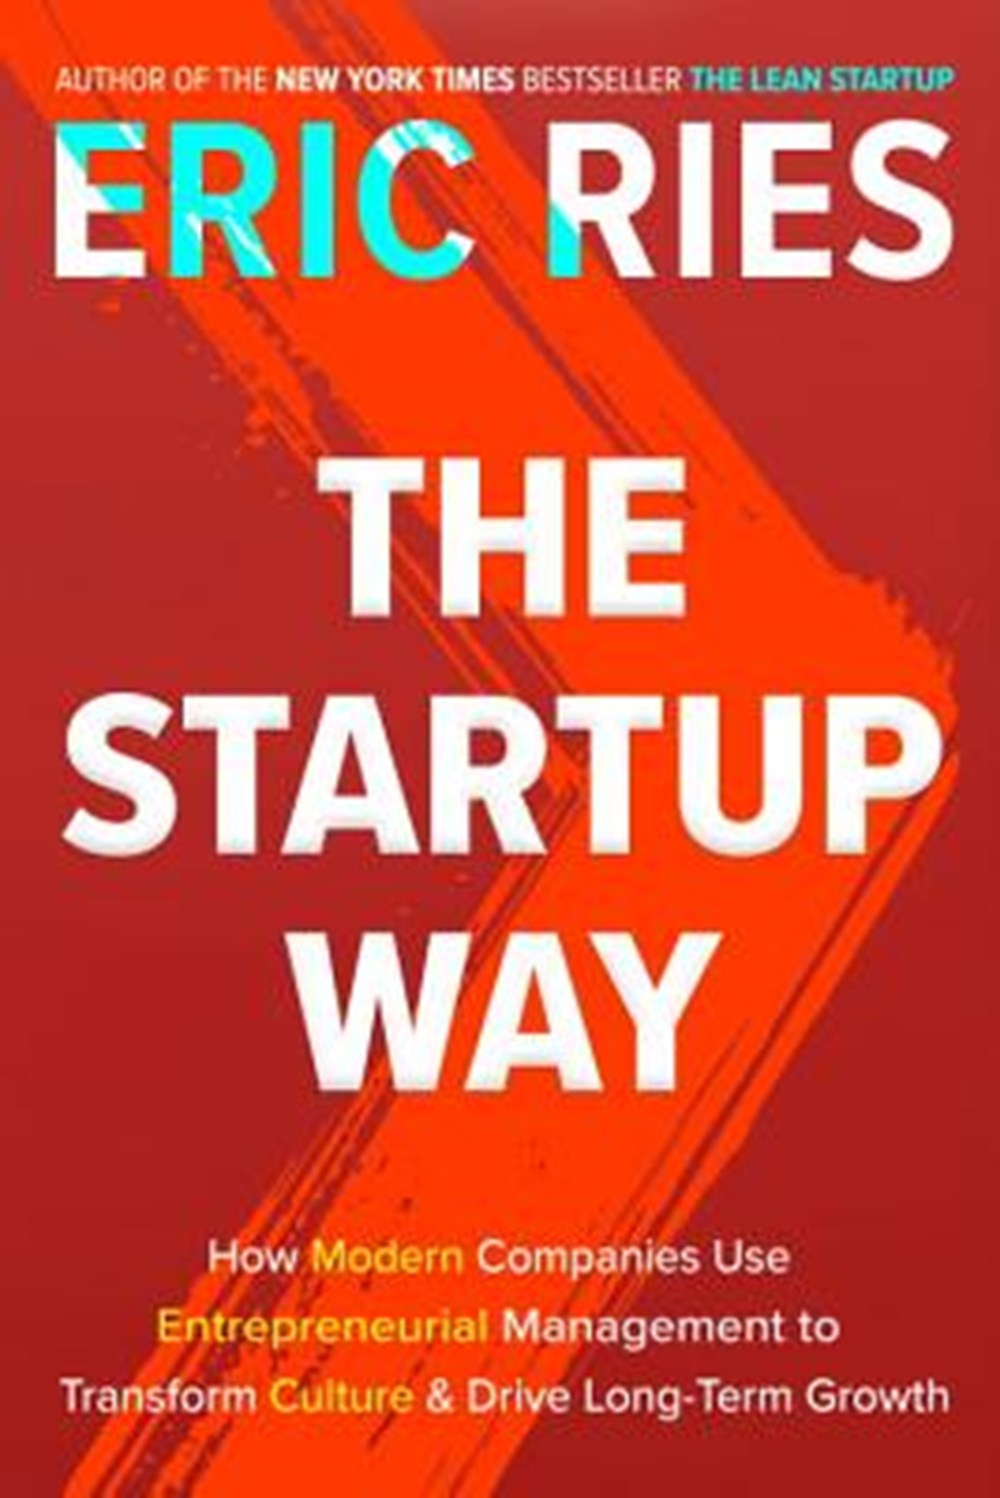 Startup Way How Modern Companies Use Entrepreneurial Management to Transform Culture and Drive Long-